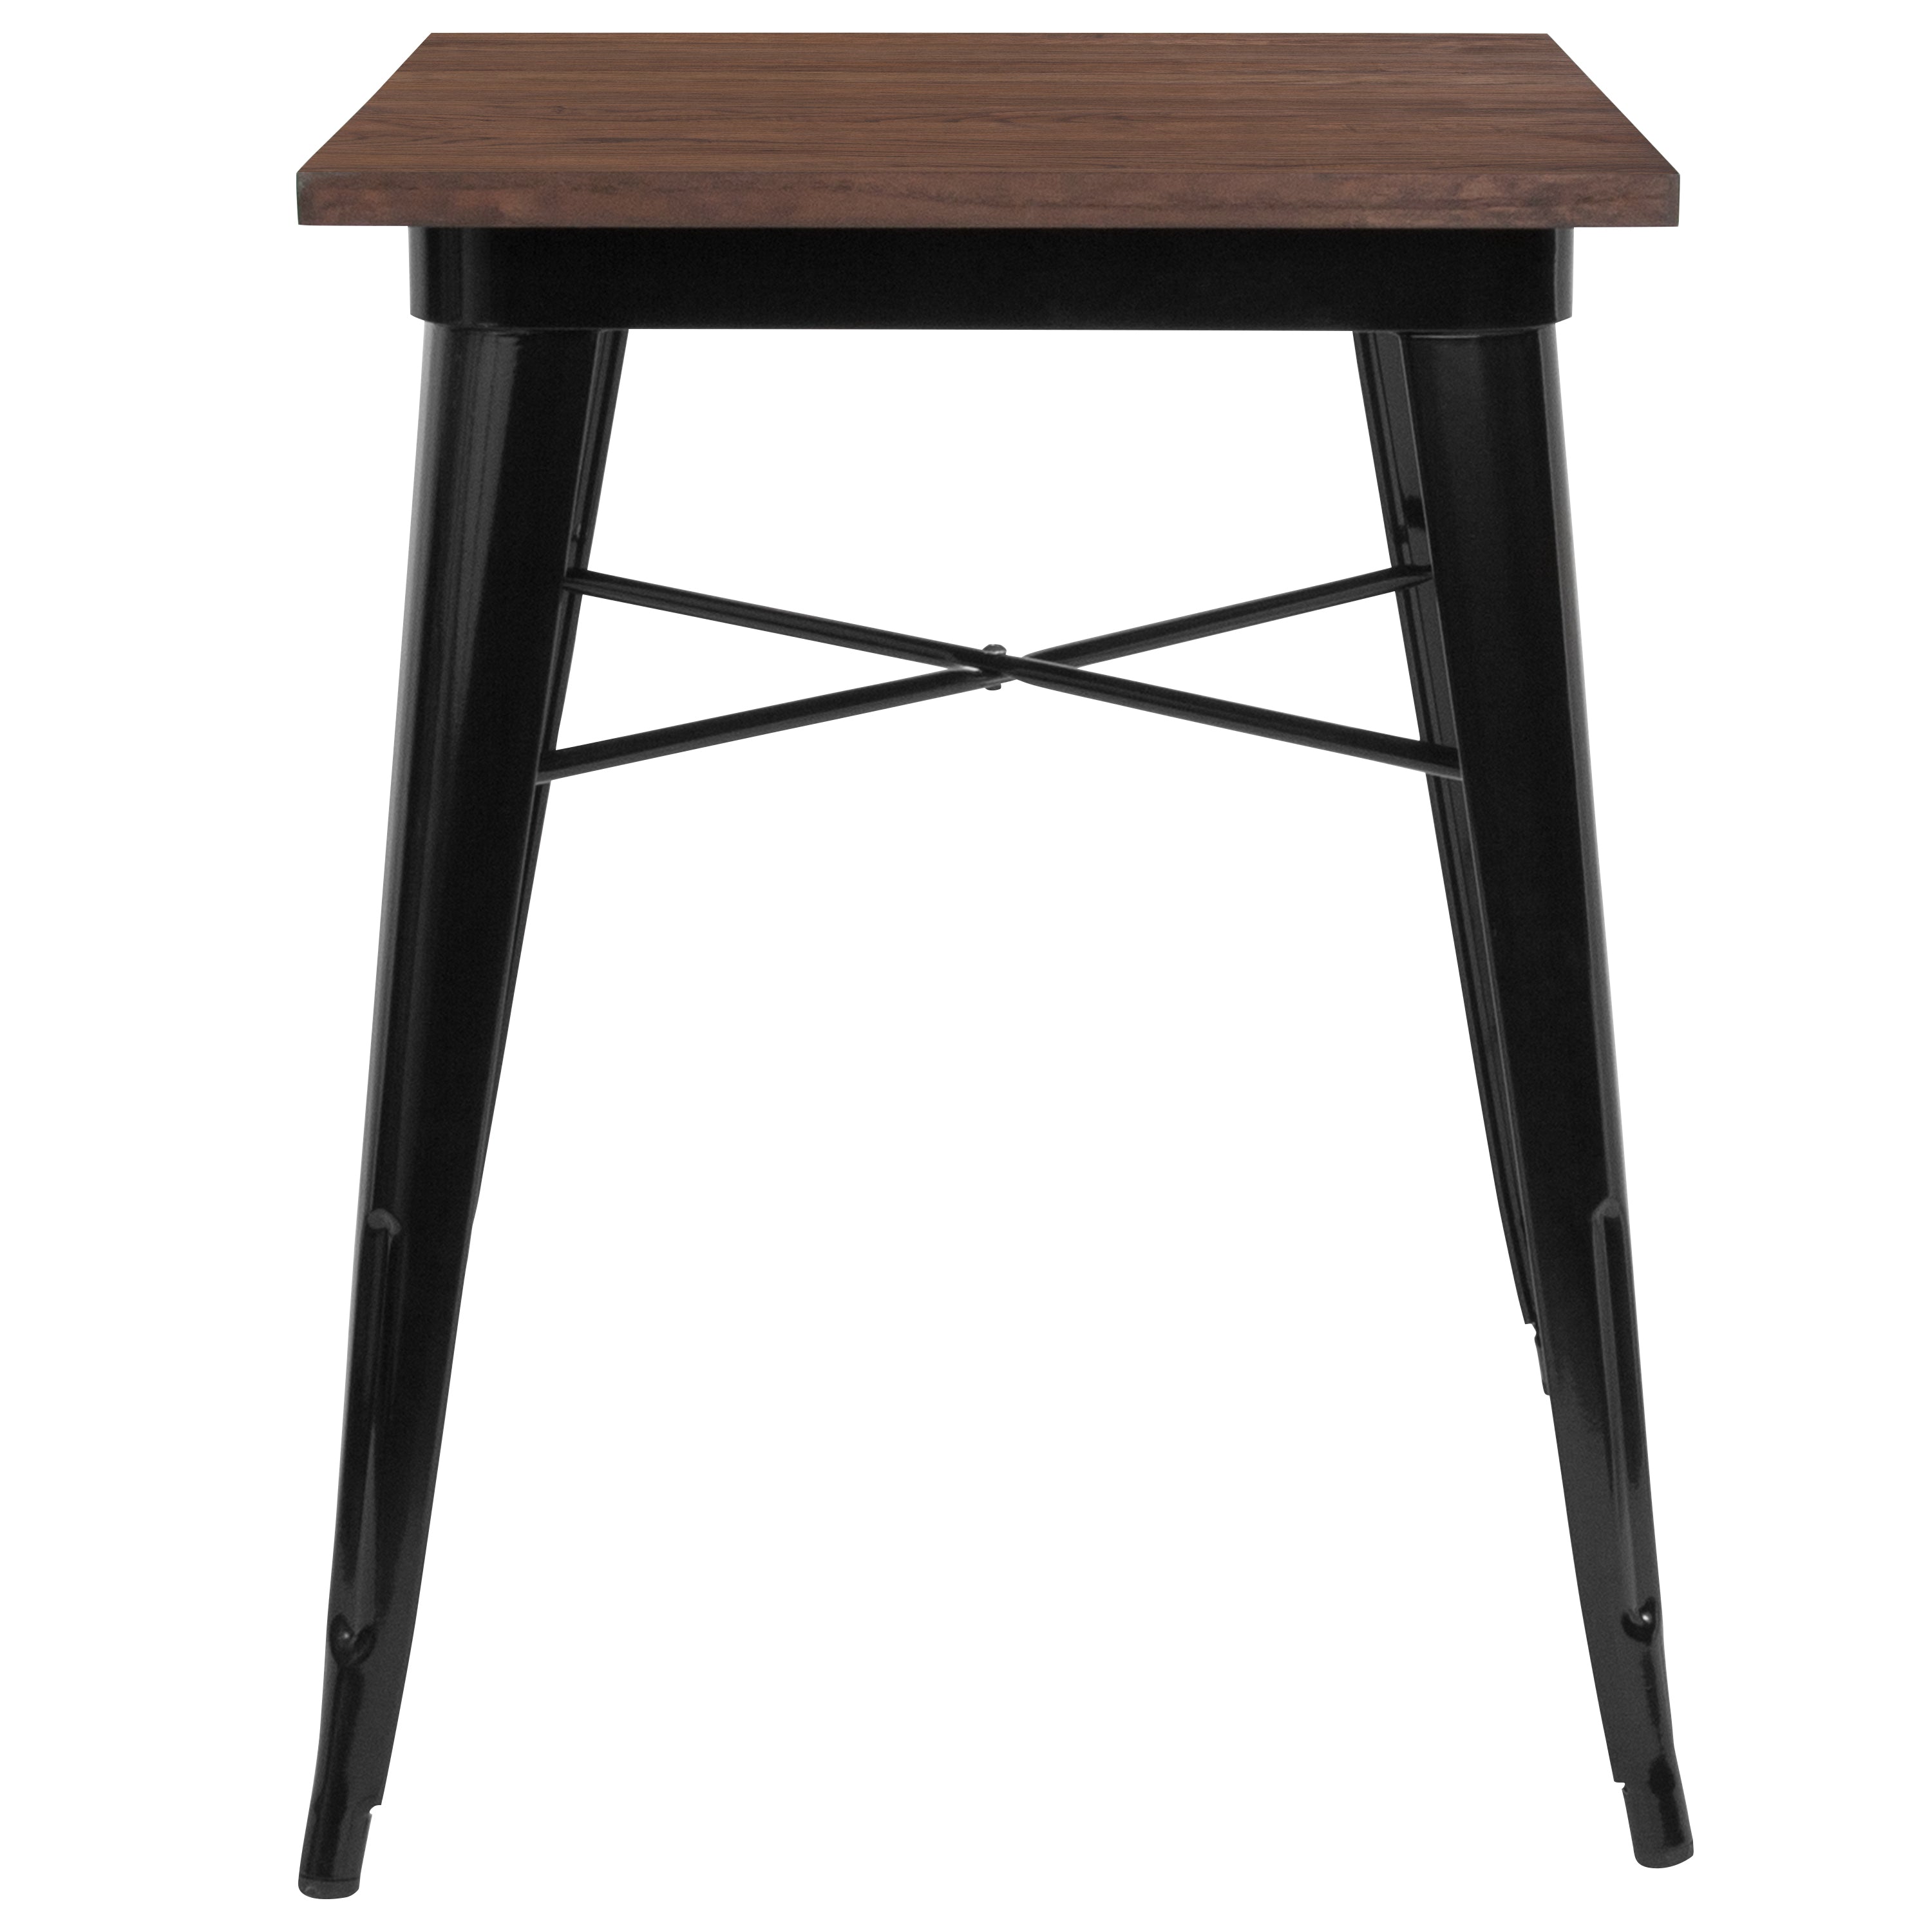 23.5" Square Metal Indoor Table with Rustic Wood Top-Metal/ Colorful Restaurant Table-Flash Furniture-Wall2Wall Furnishings